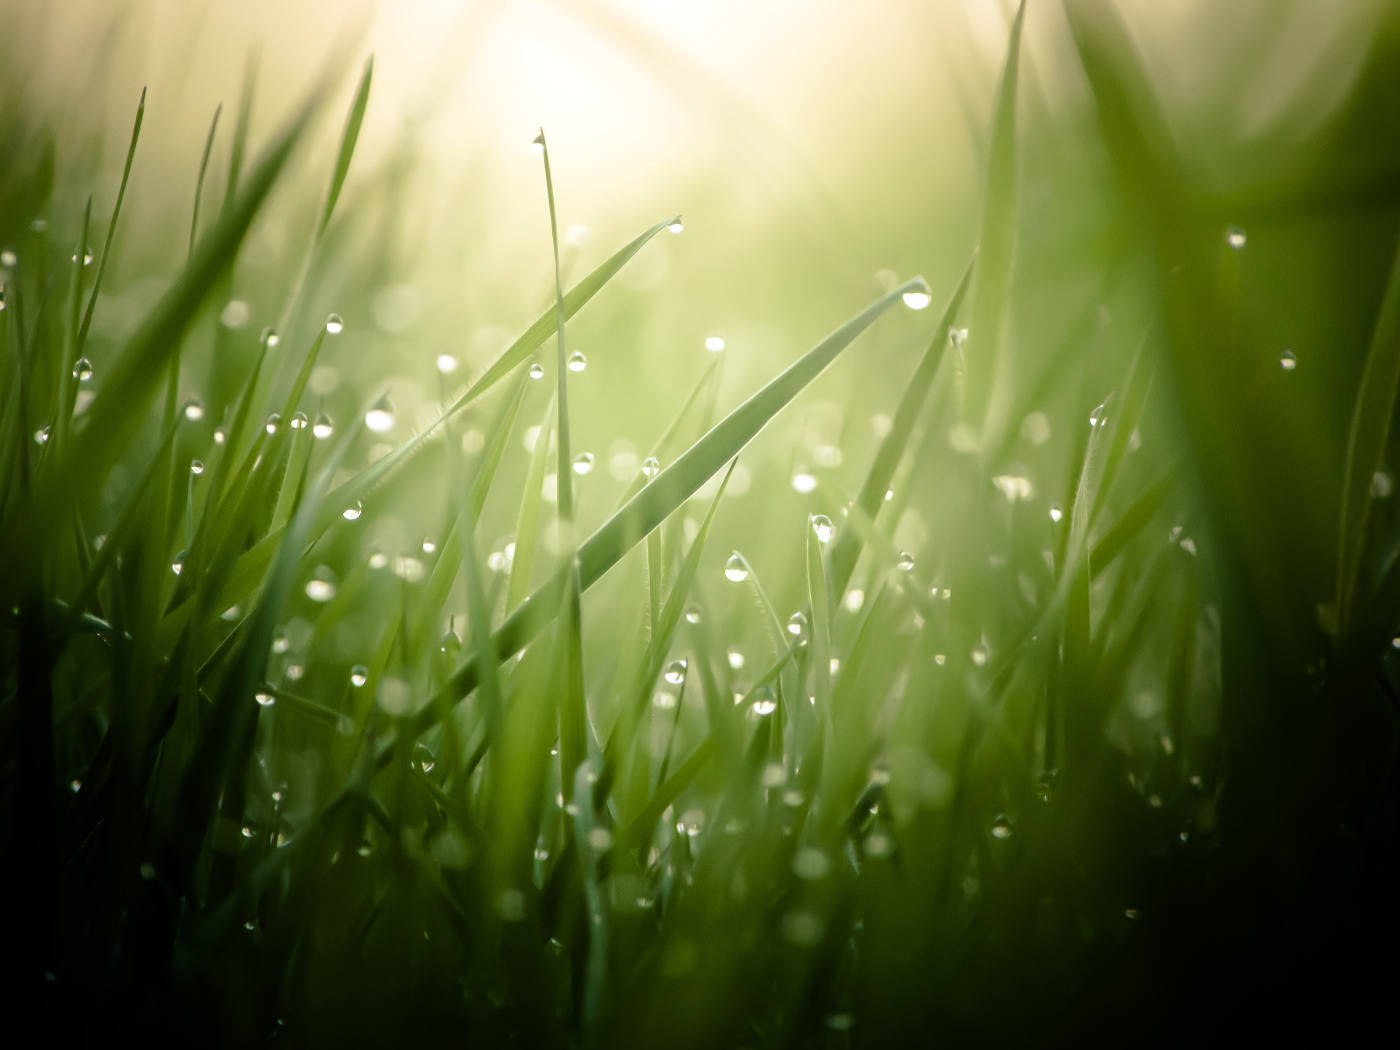 Morning dew on a green grass